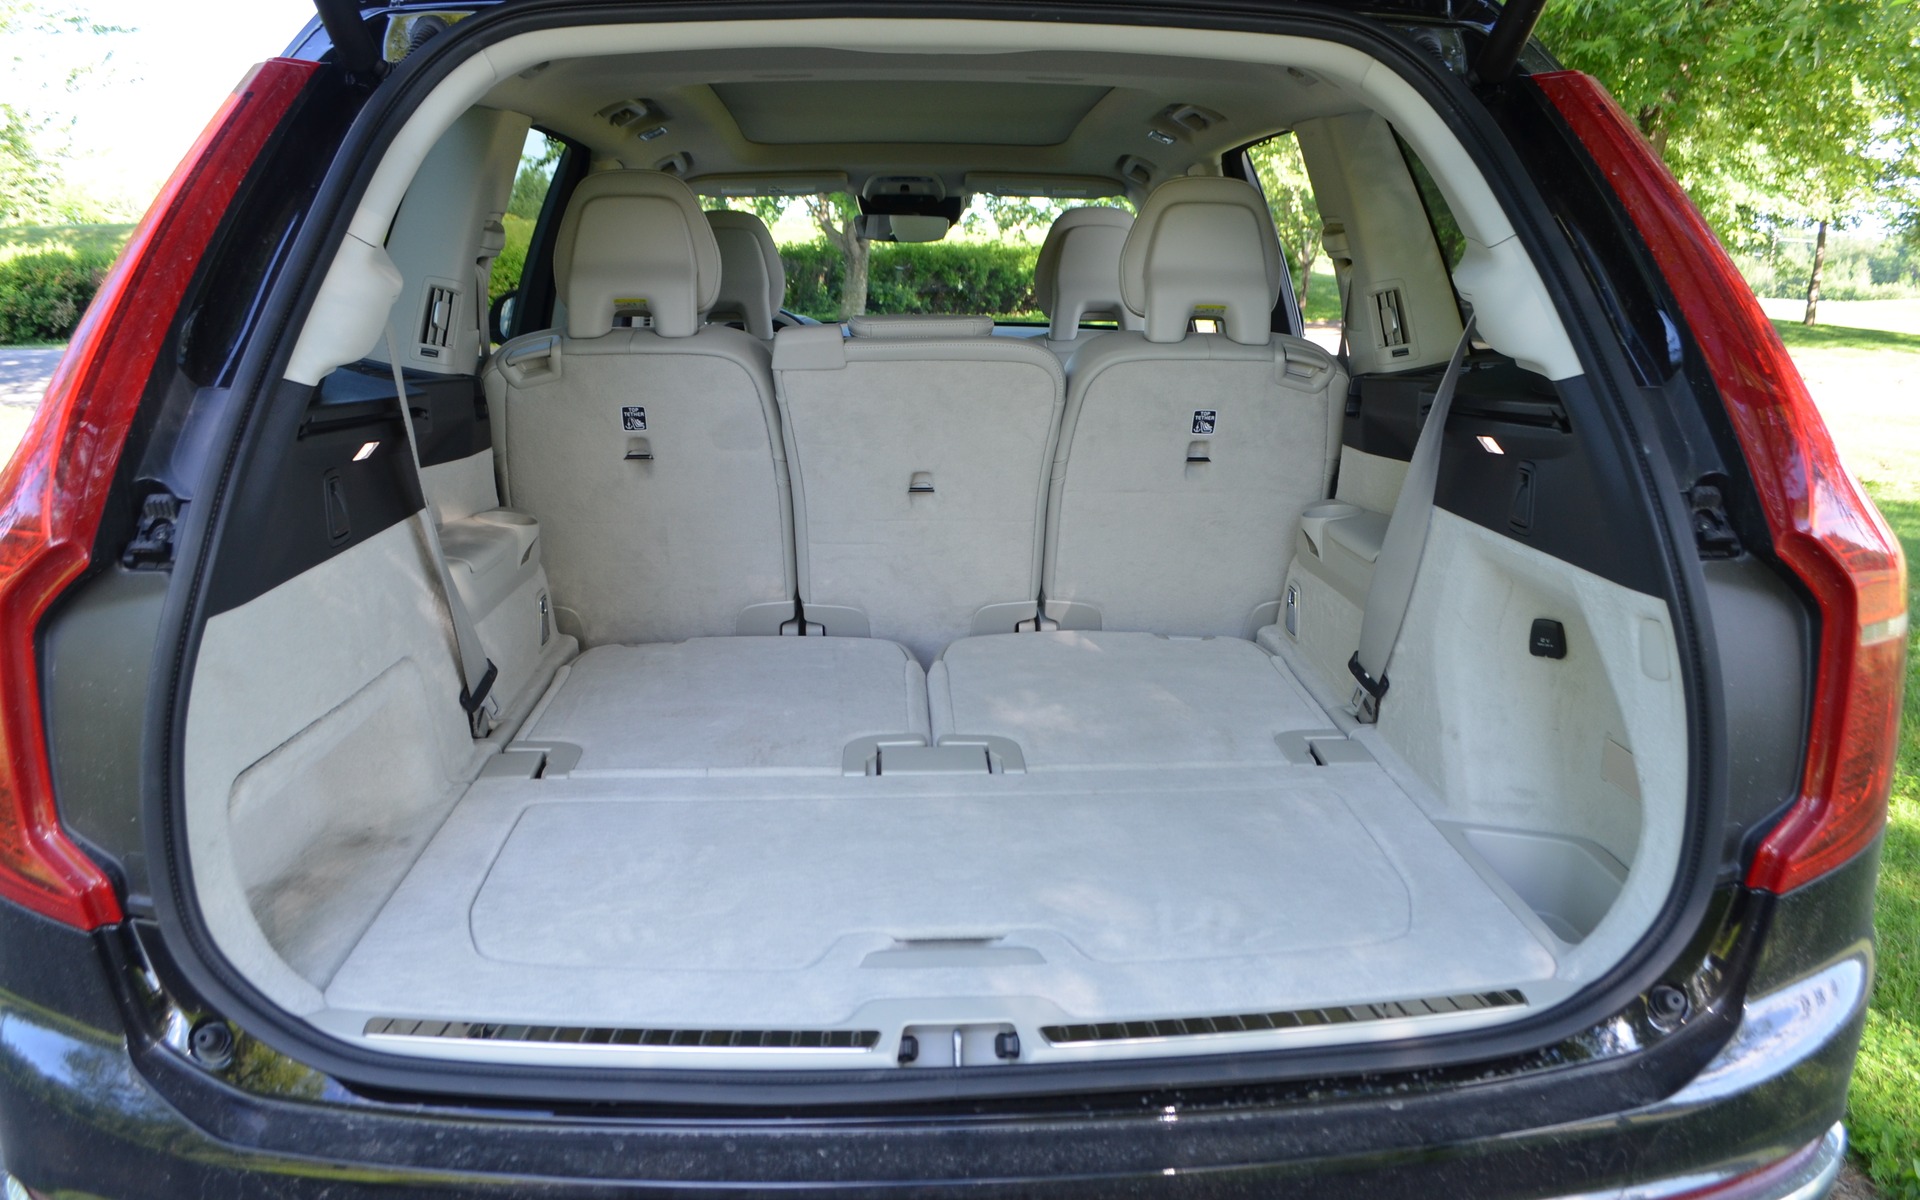 The XC90's cabin is spacious and comfortable.